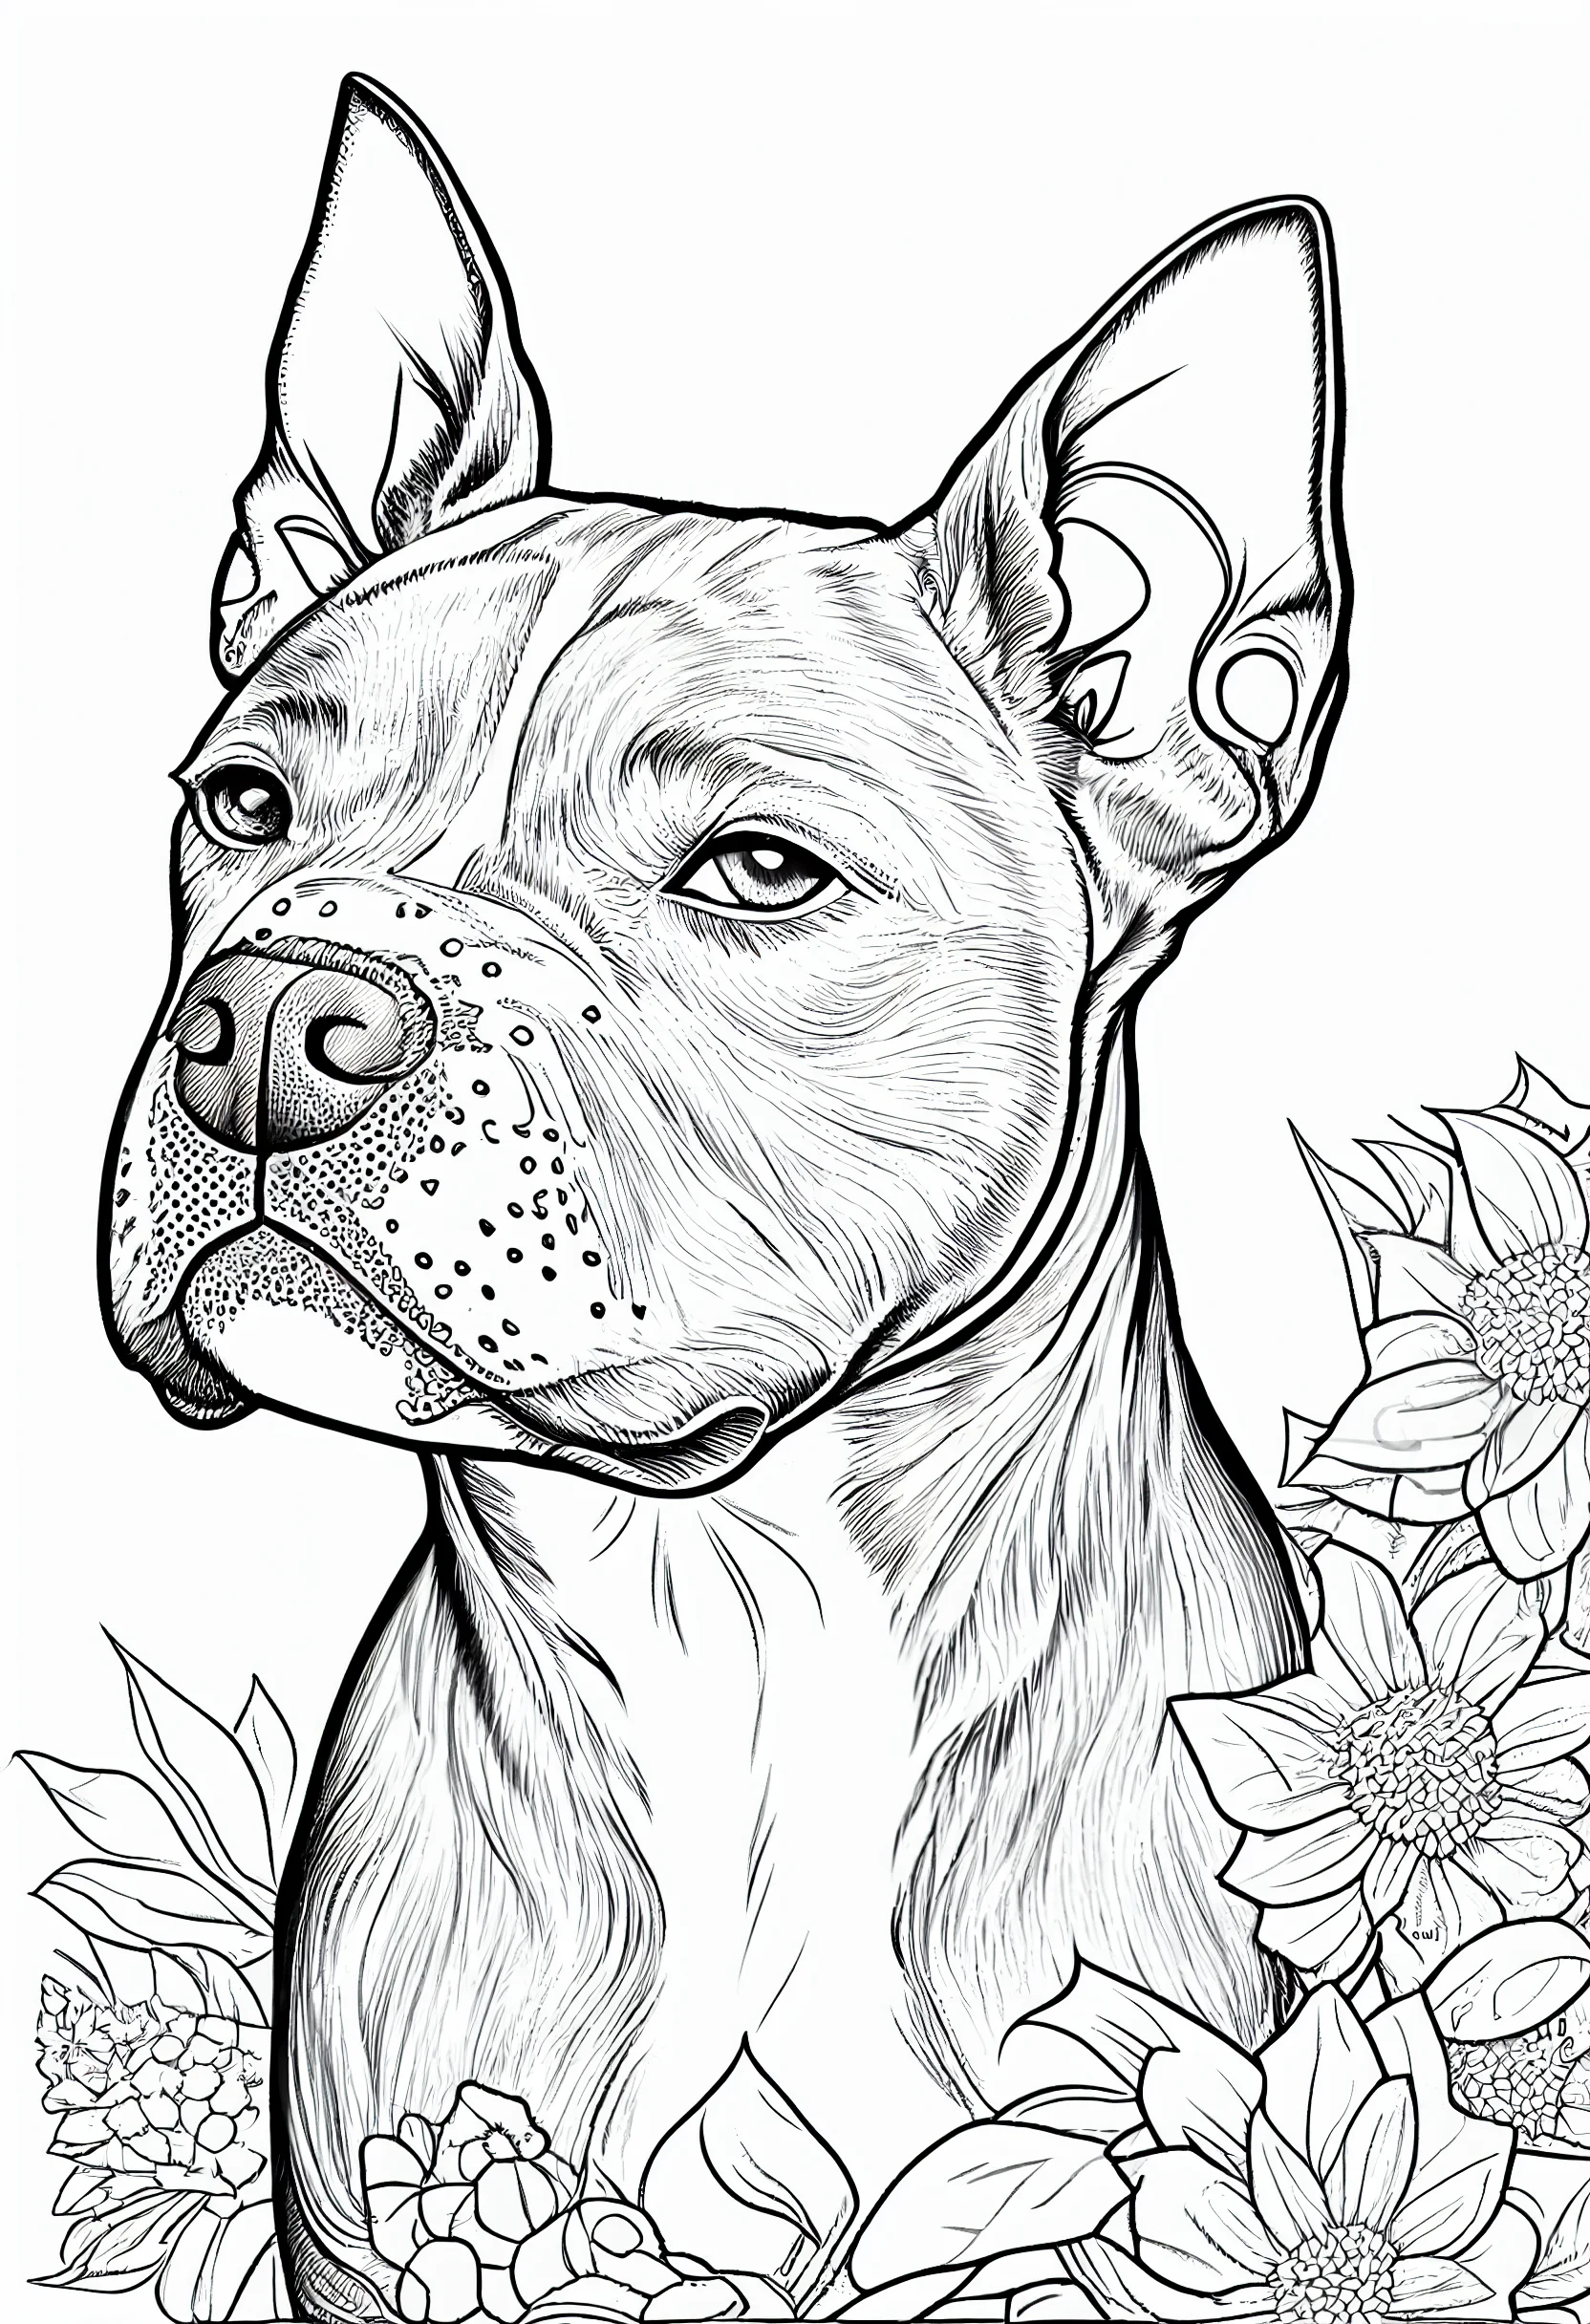 Dog coloring pages for adults easy printable